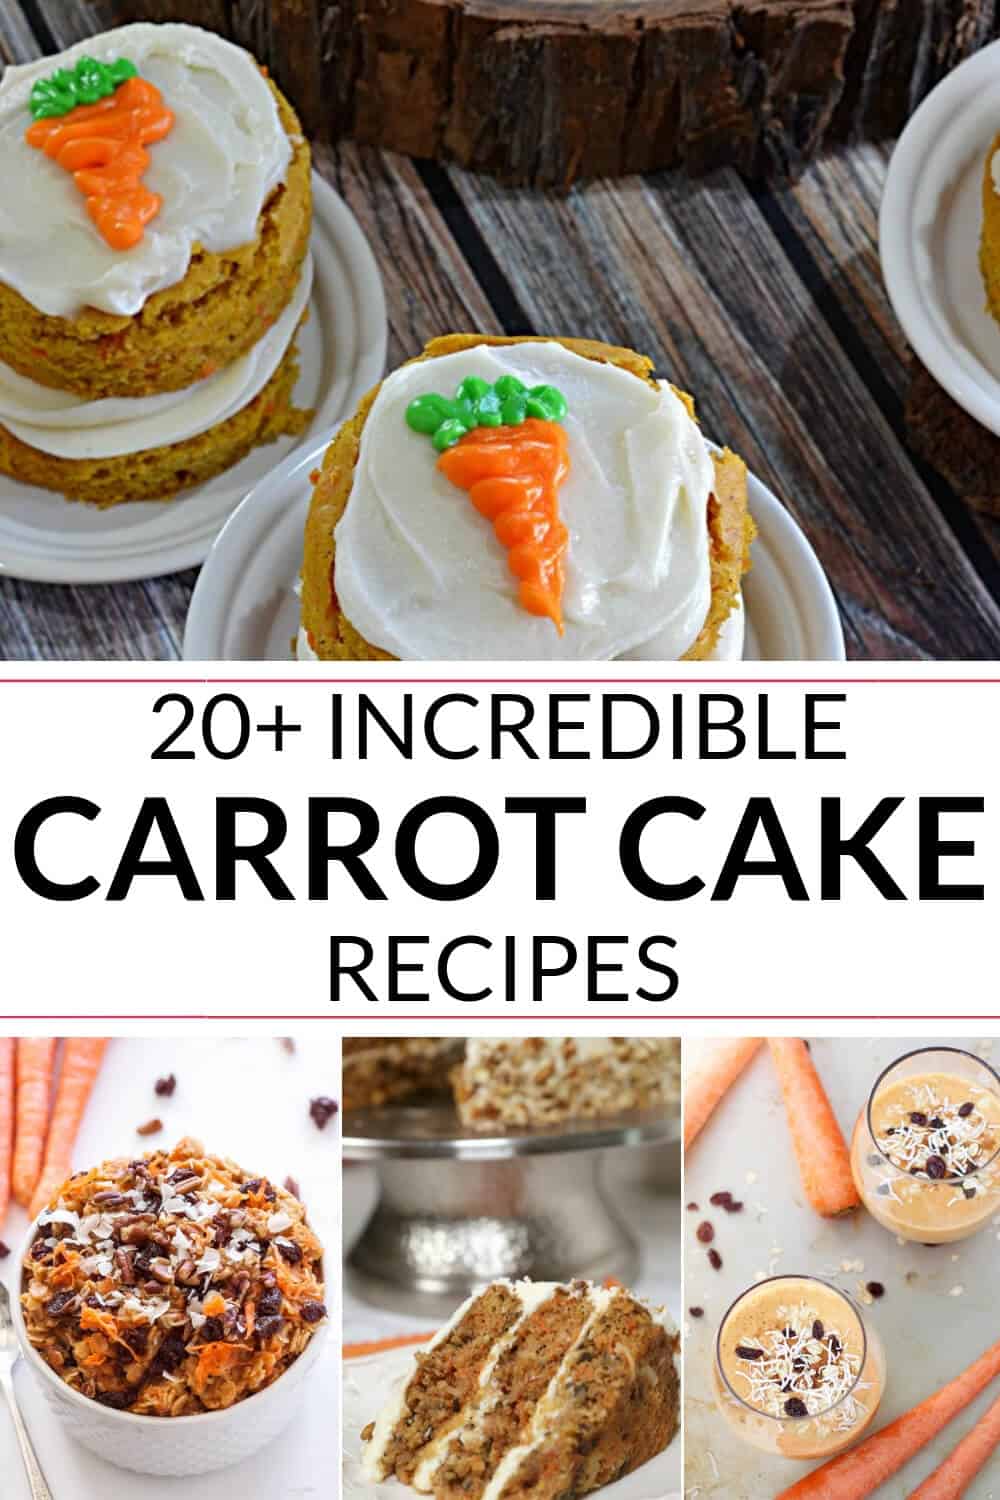 A collection of moist carrot cake recipes